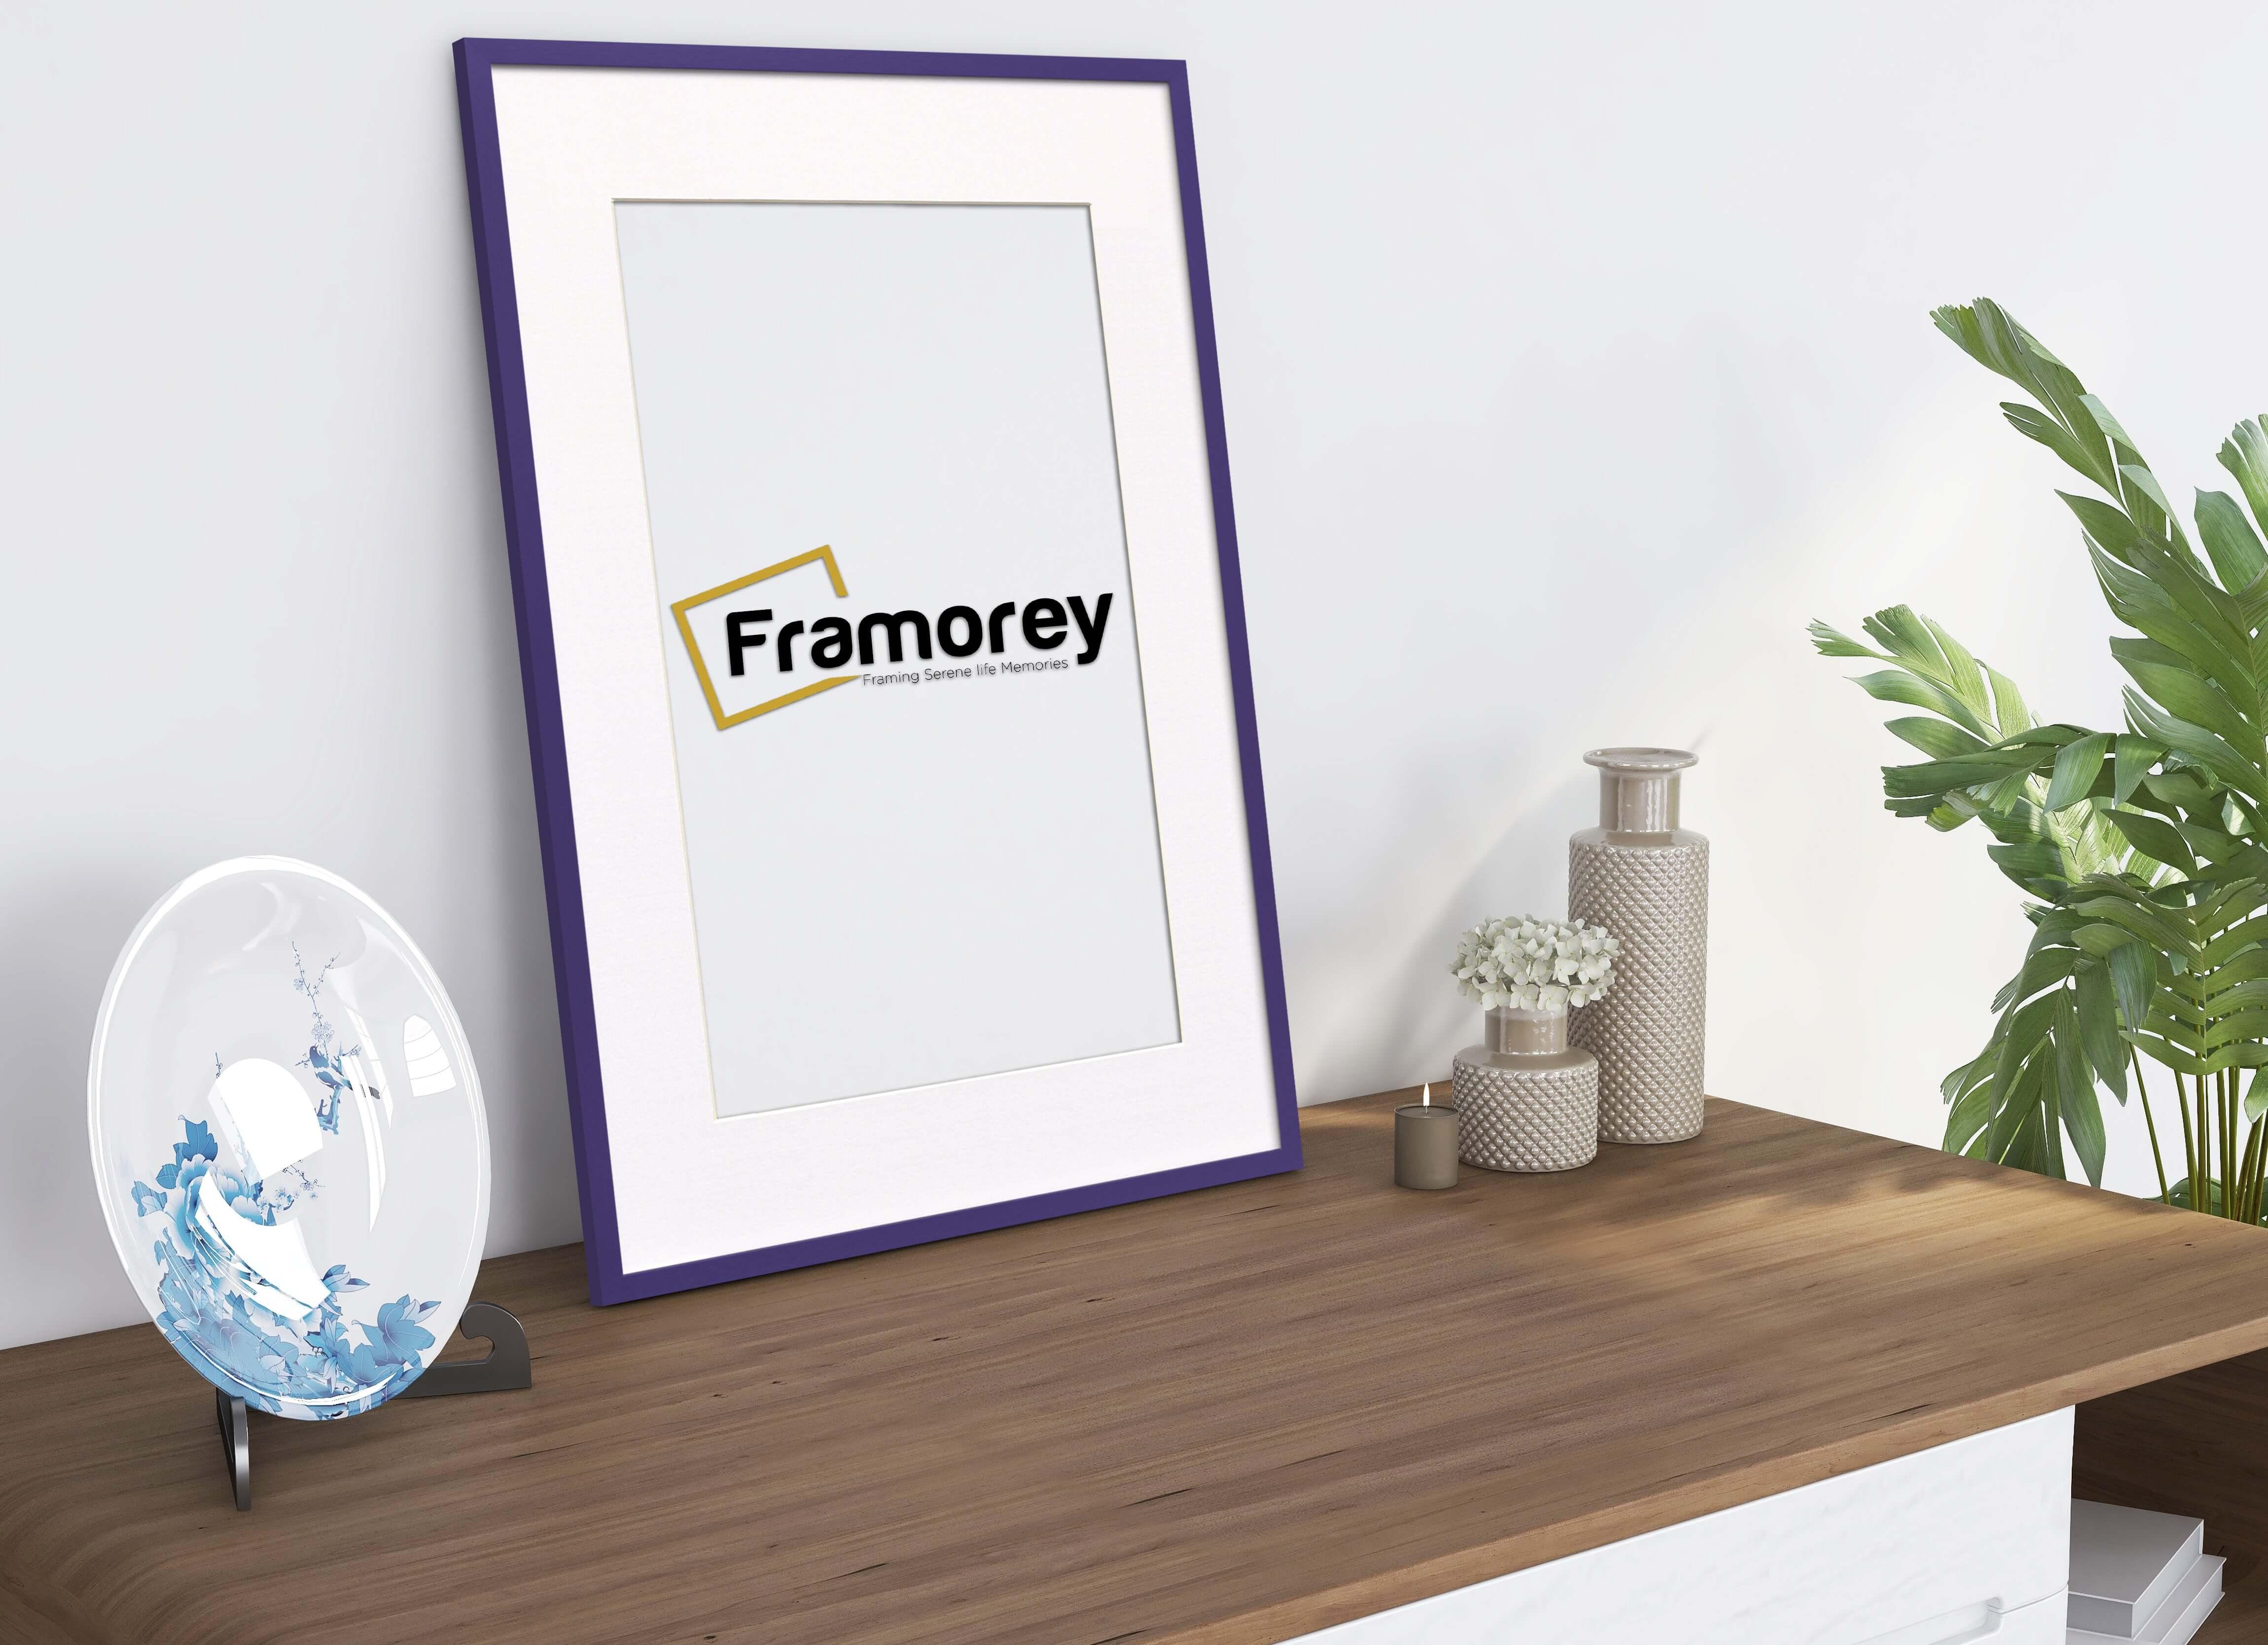 Thin Purple Photo Frame With White Mount Flat Wooden Effect Picture Frame Maxi Art Poster Frames - FRAMOREY